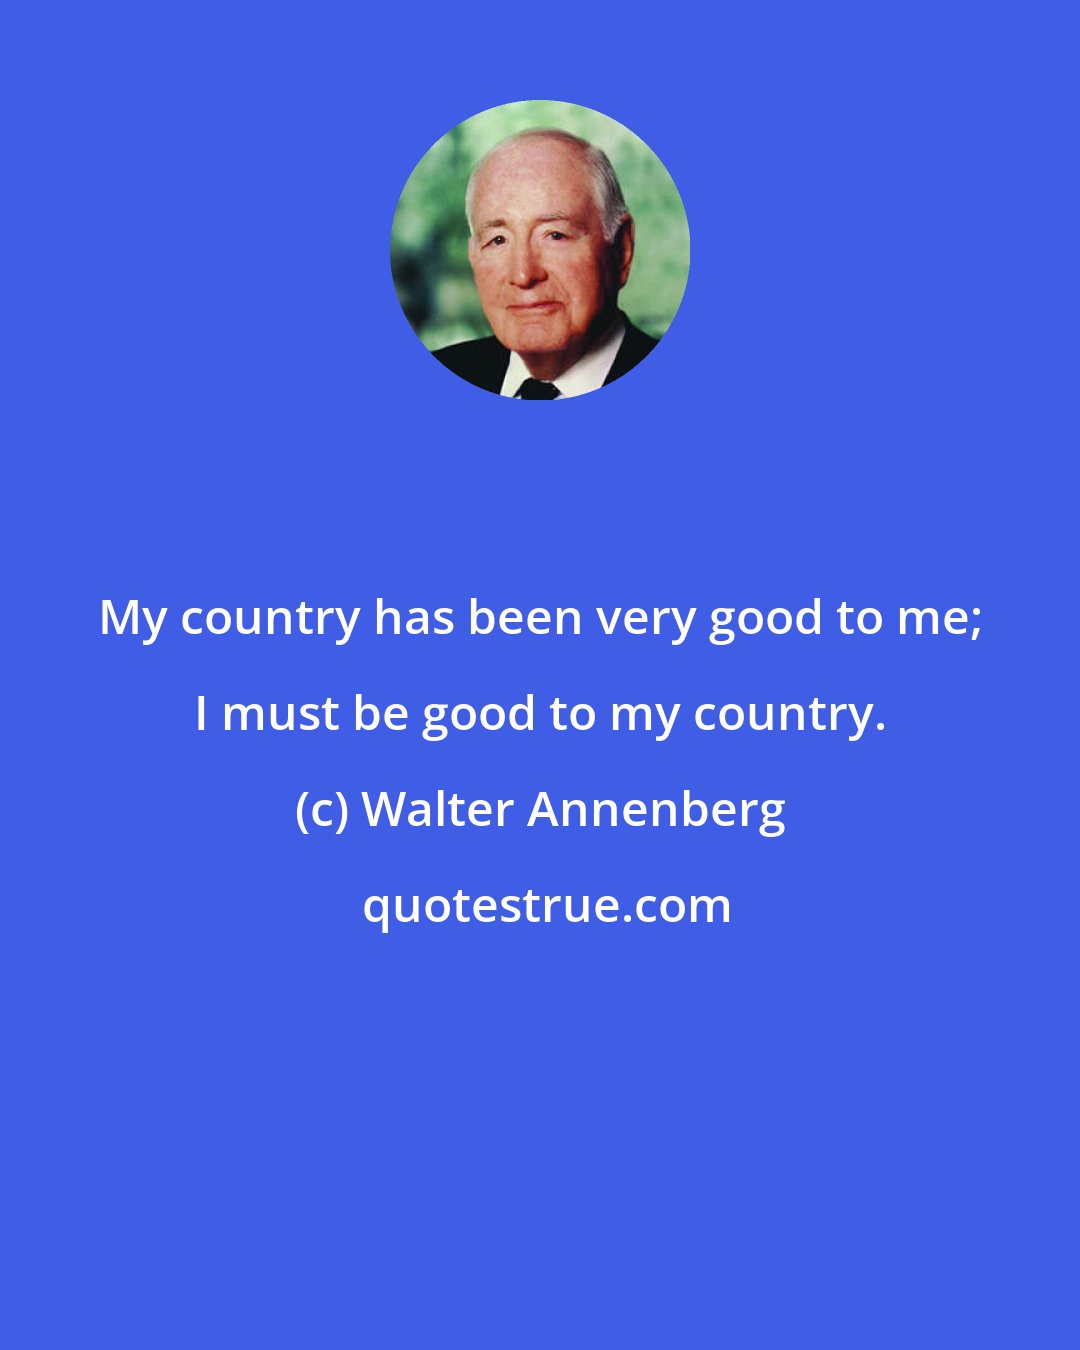 Walter Annenberg: My country has been very good to me; I must be good to my country.